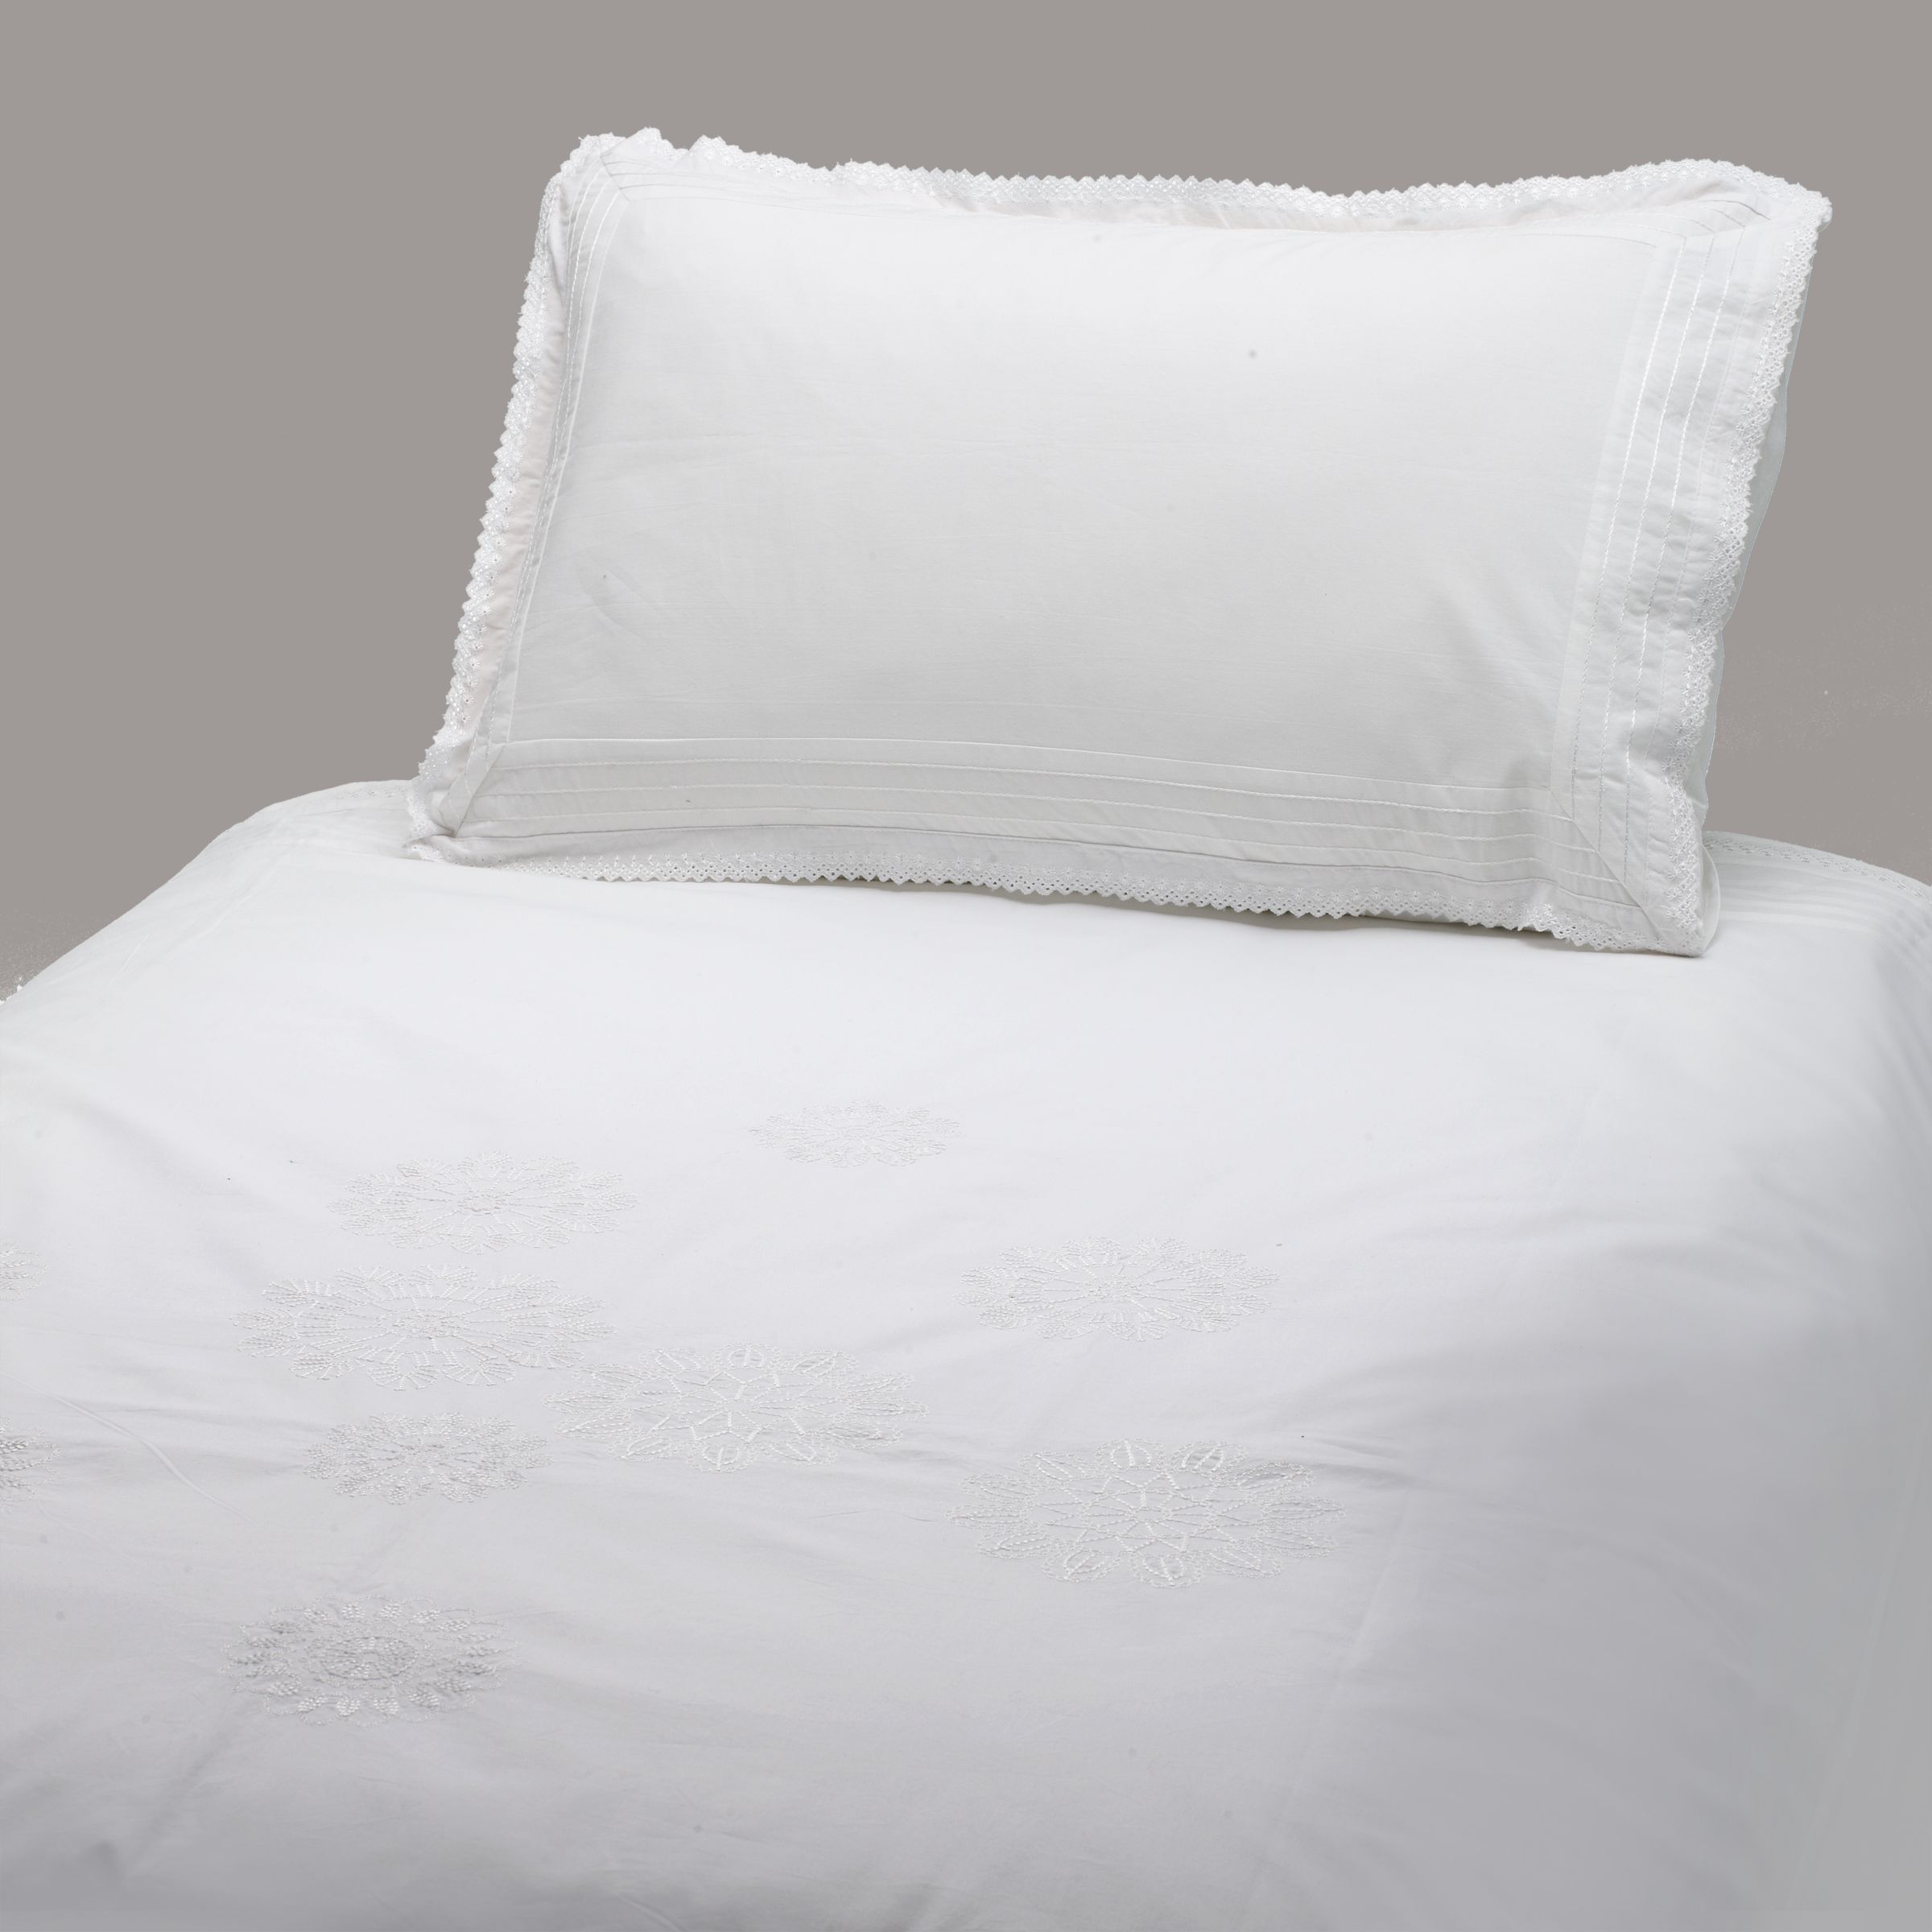 John Lewis Heritage Cotbed Duvet Cover And Pillow Set White At